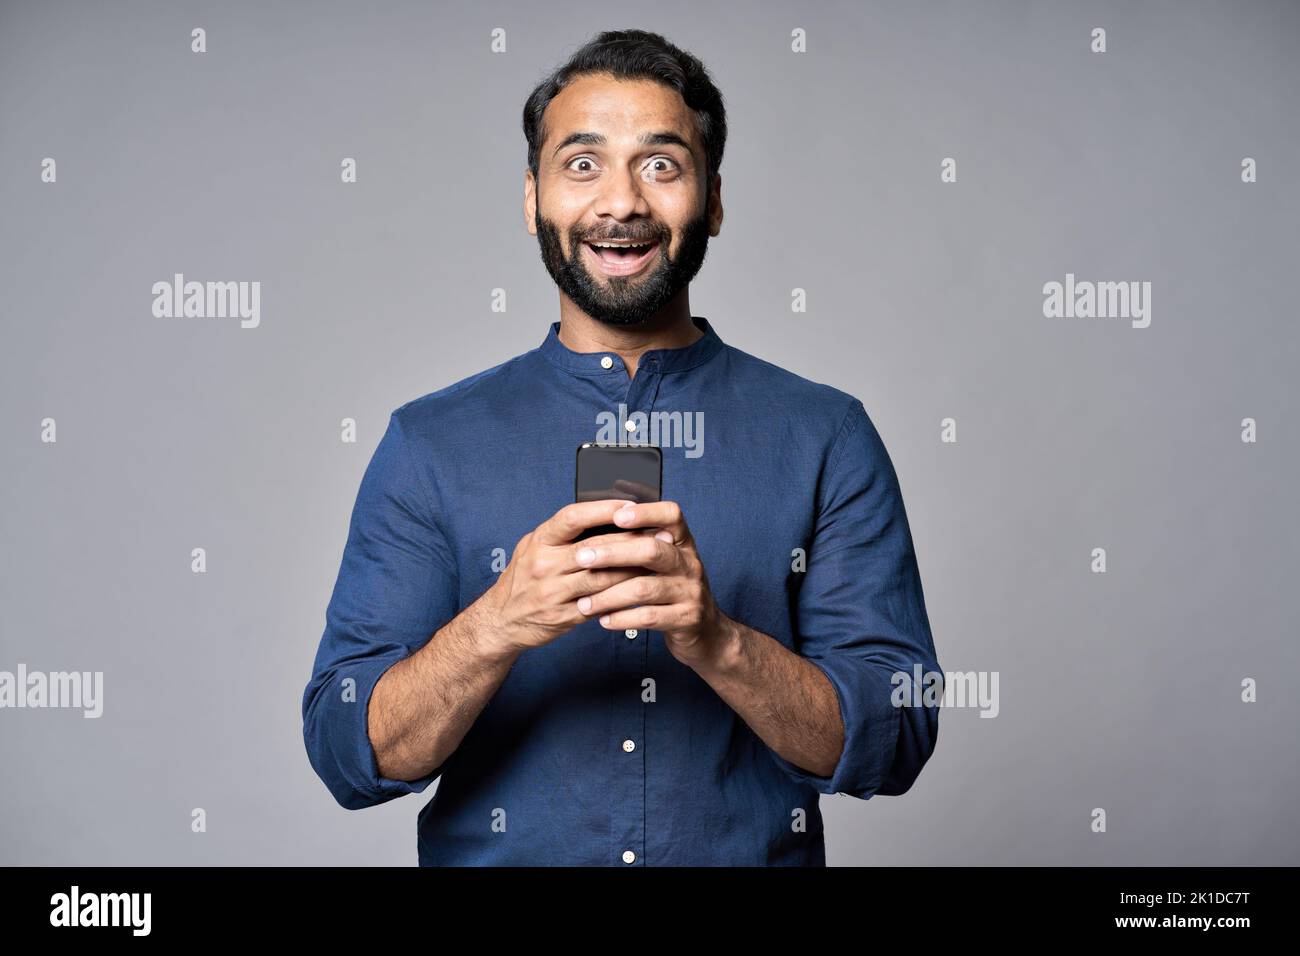 Excited indian business man using mobile phone isolated on gray background. Stock Photo